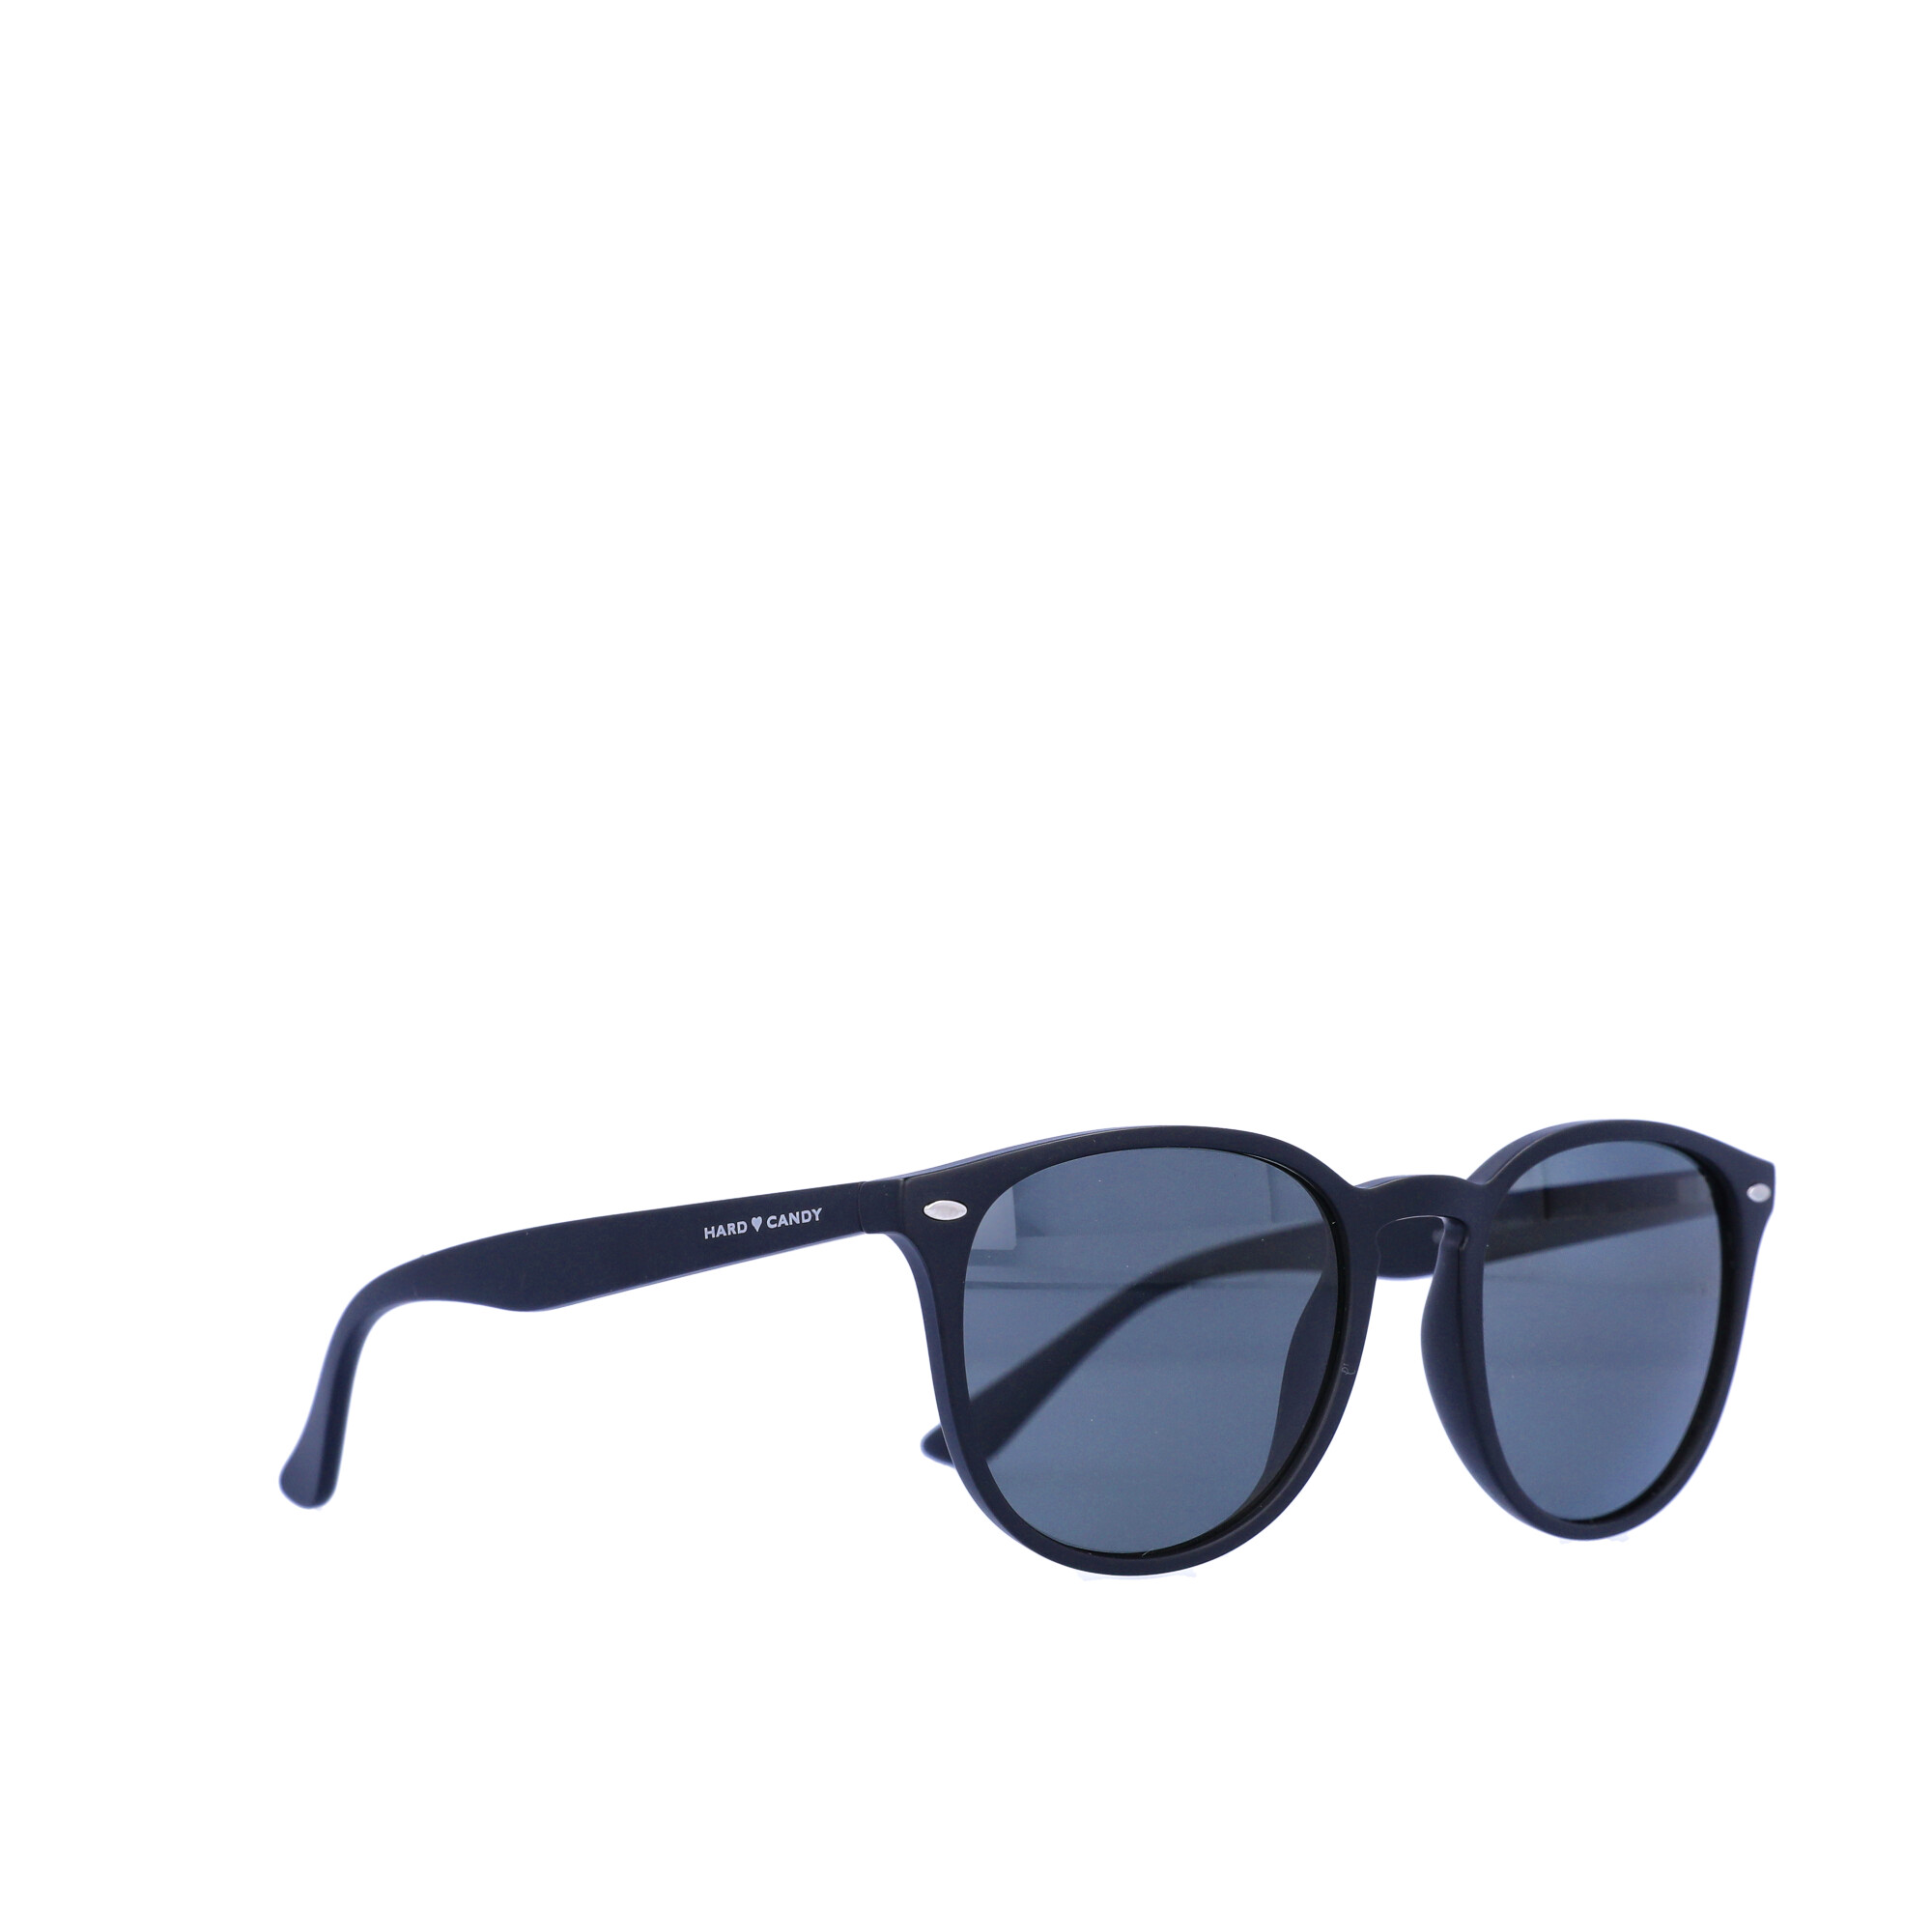 Hard Candy Womens Rx'able Sunglasses, Hs20, Matte Black, 52-20-145, with Case - image 2 of 20